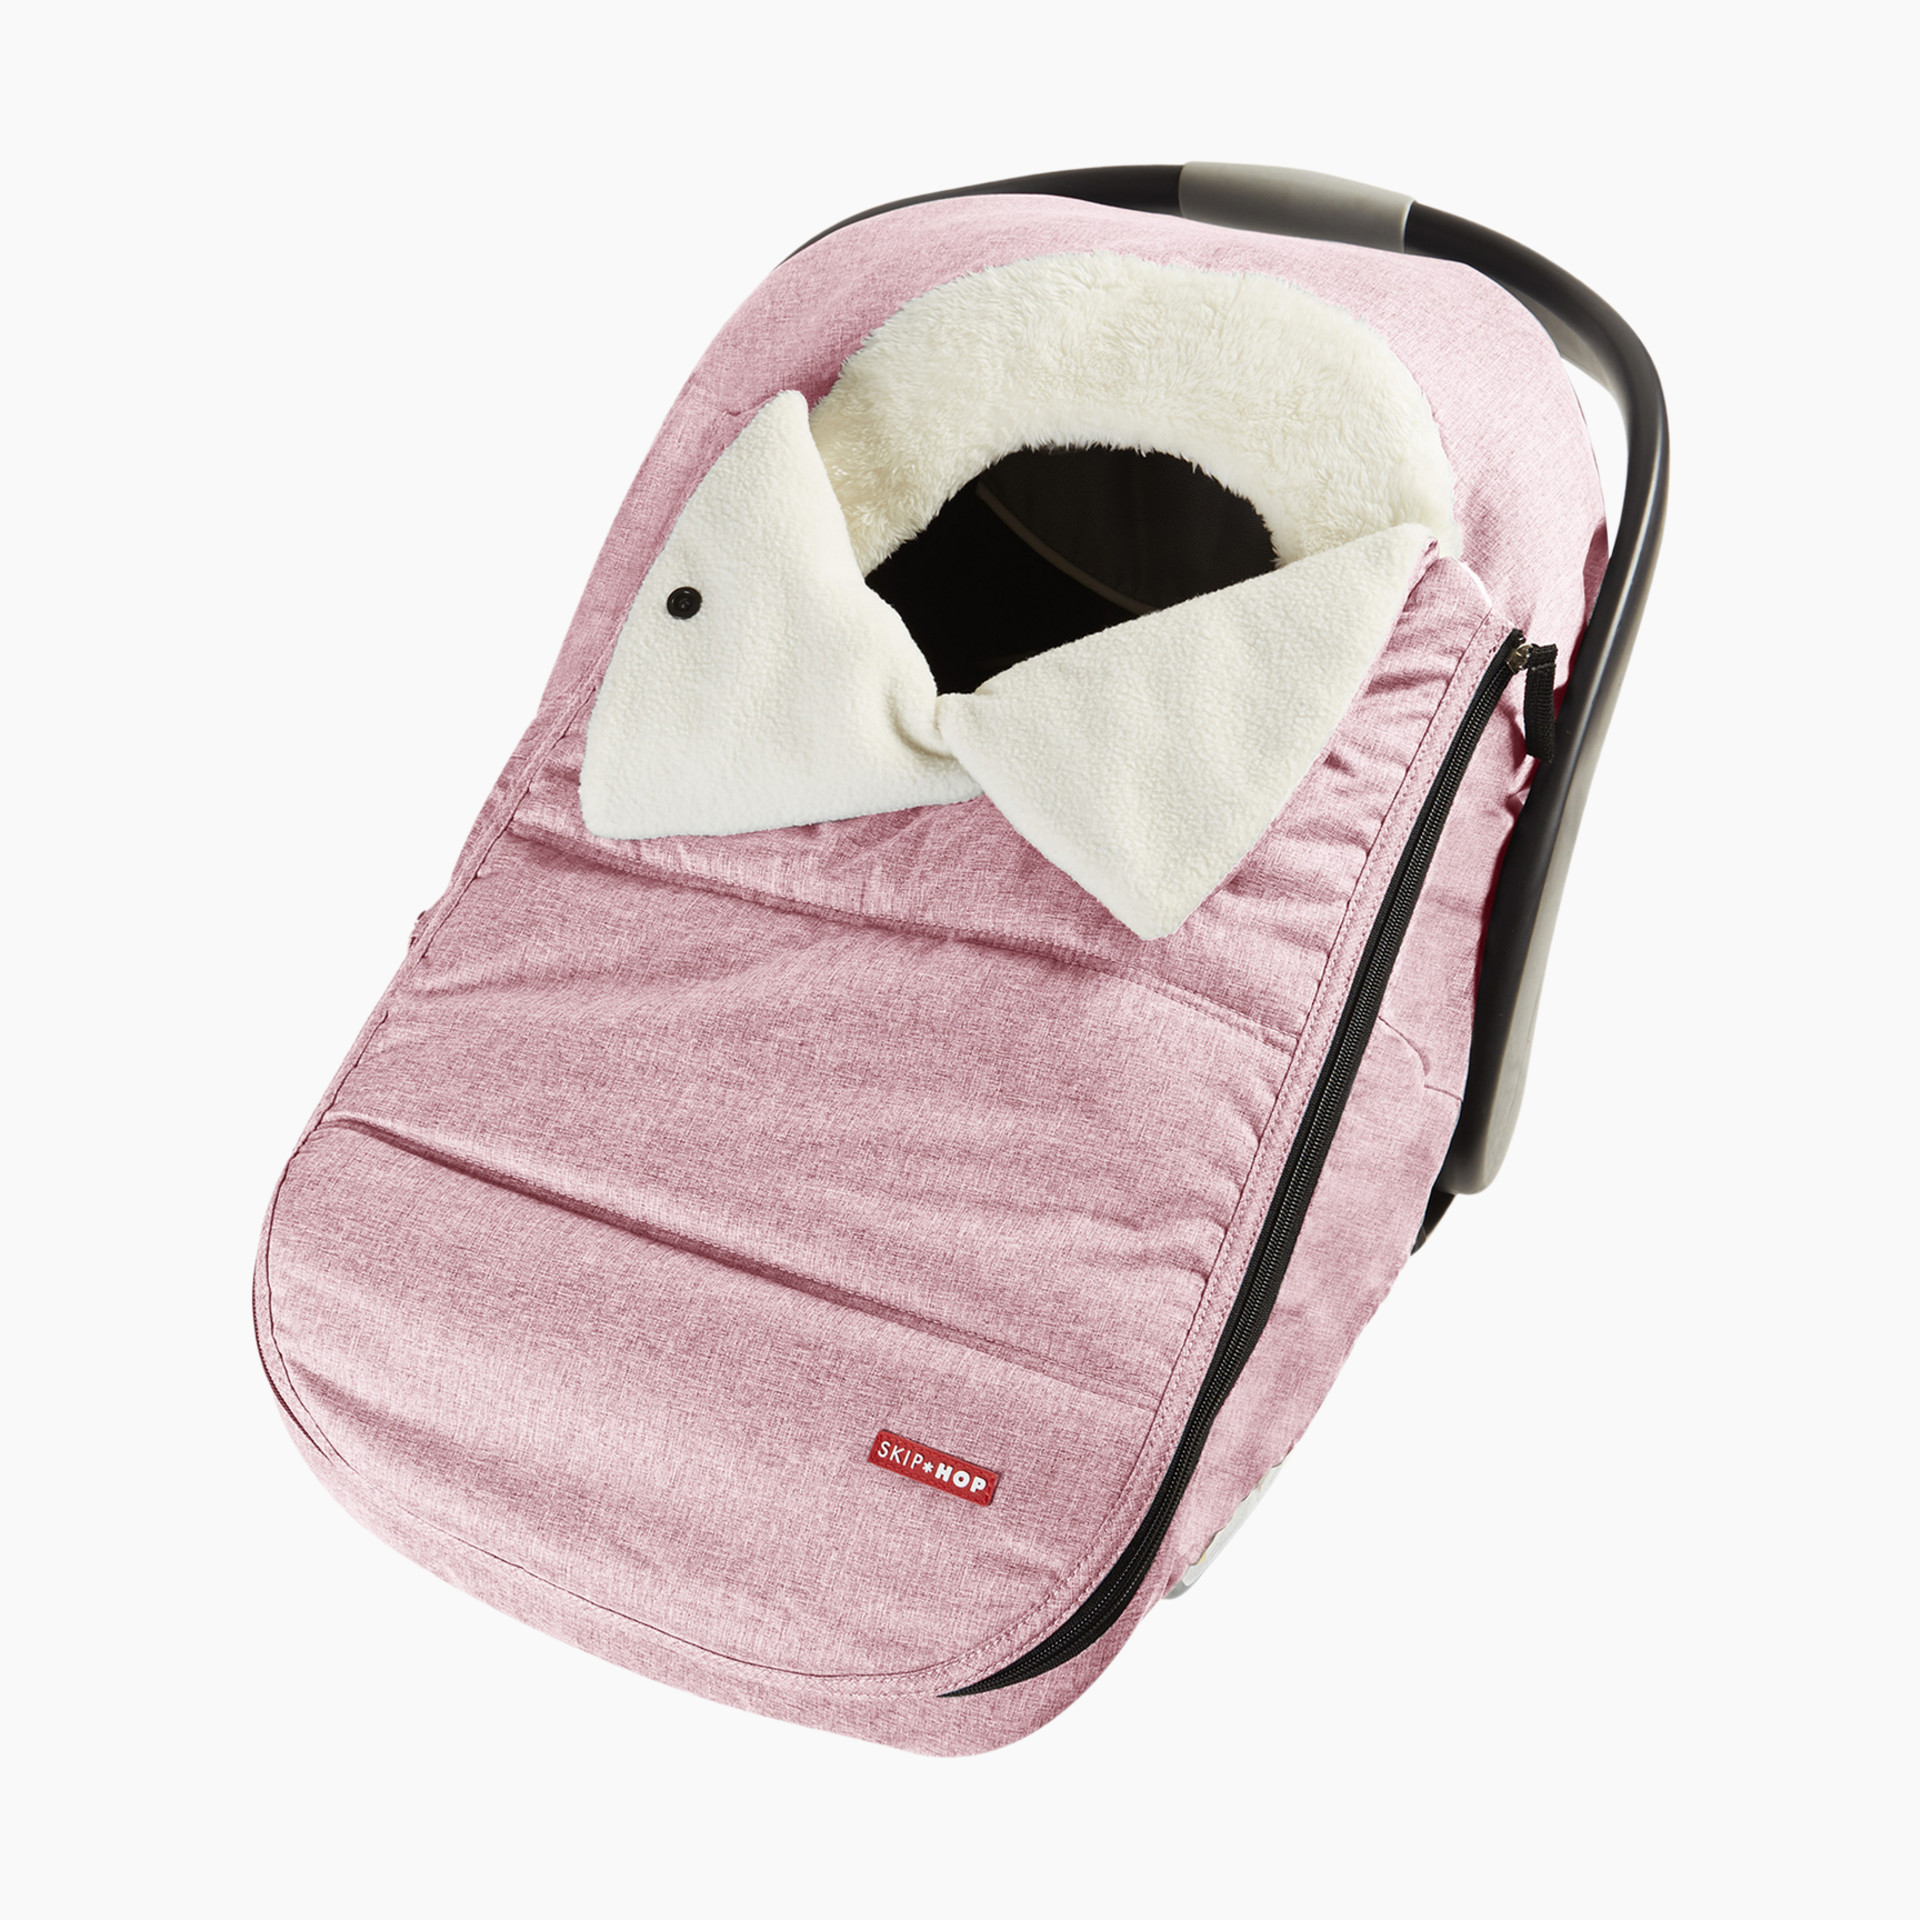 Jj Cole Car Seat Cover - Heather Gray : Target